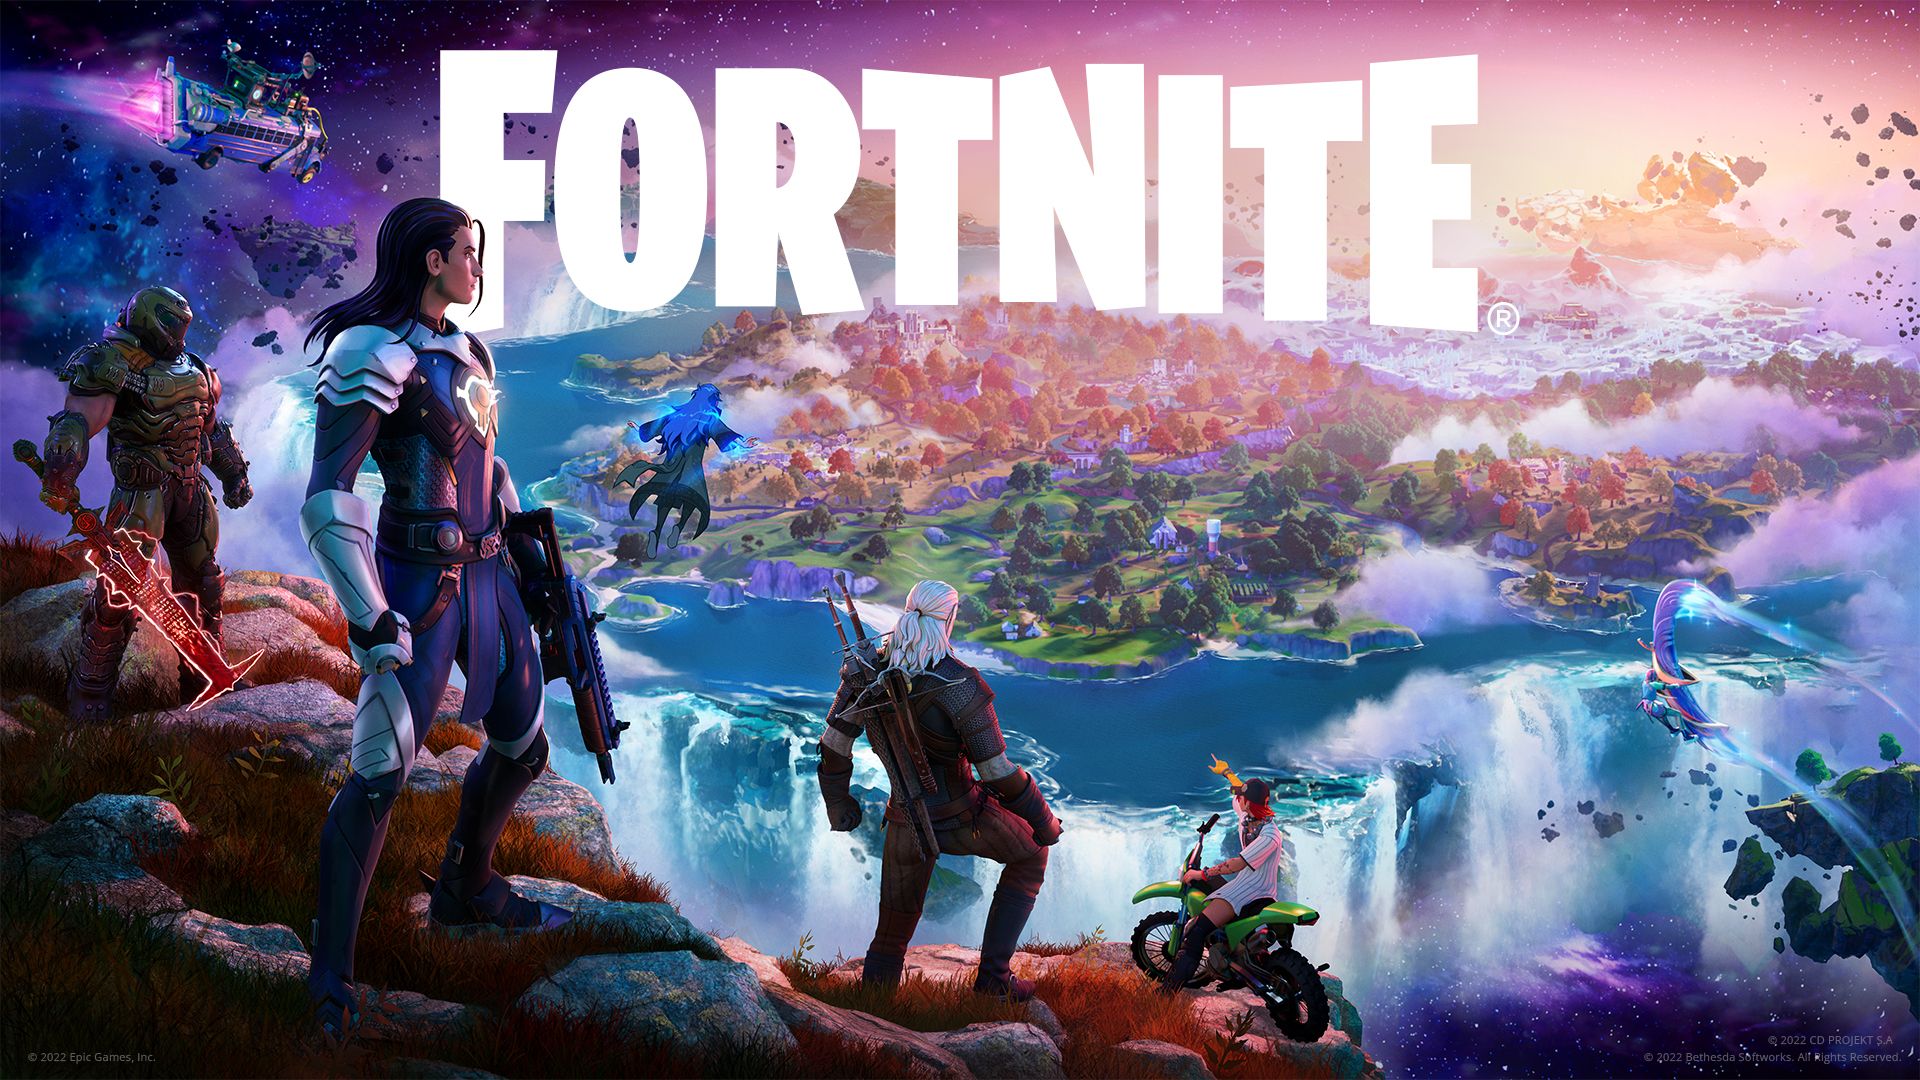 How to Enable Fortnite's 2FA